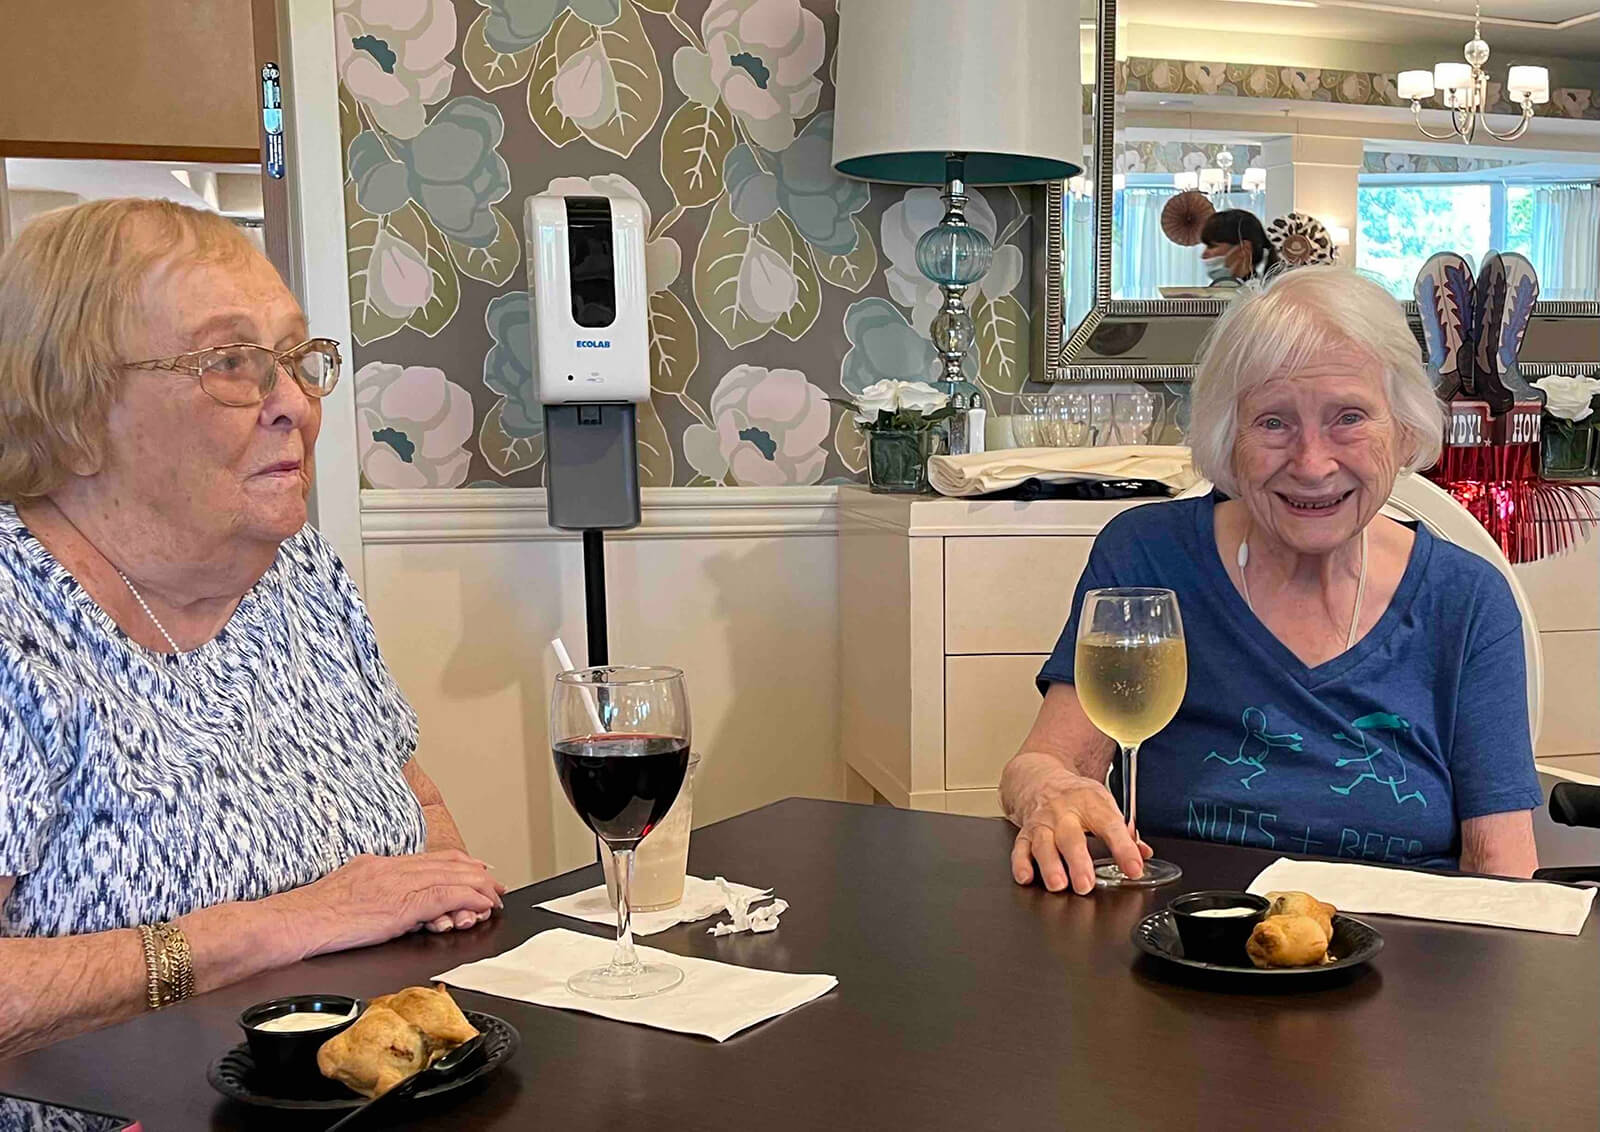 Residents at The Waters of Oakdale sharing stories over wine and appetizers during a social dining event, promoting friendship and enjoyment.